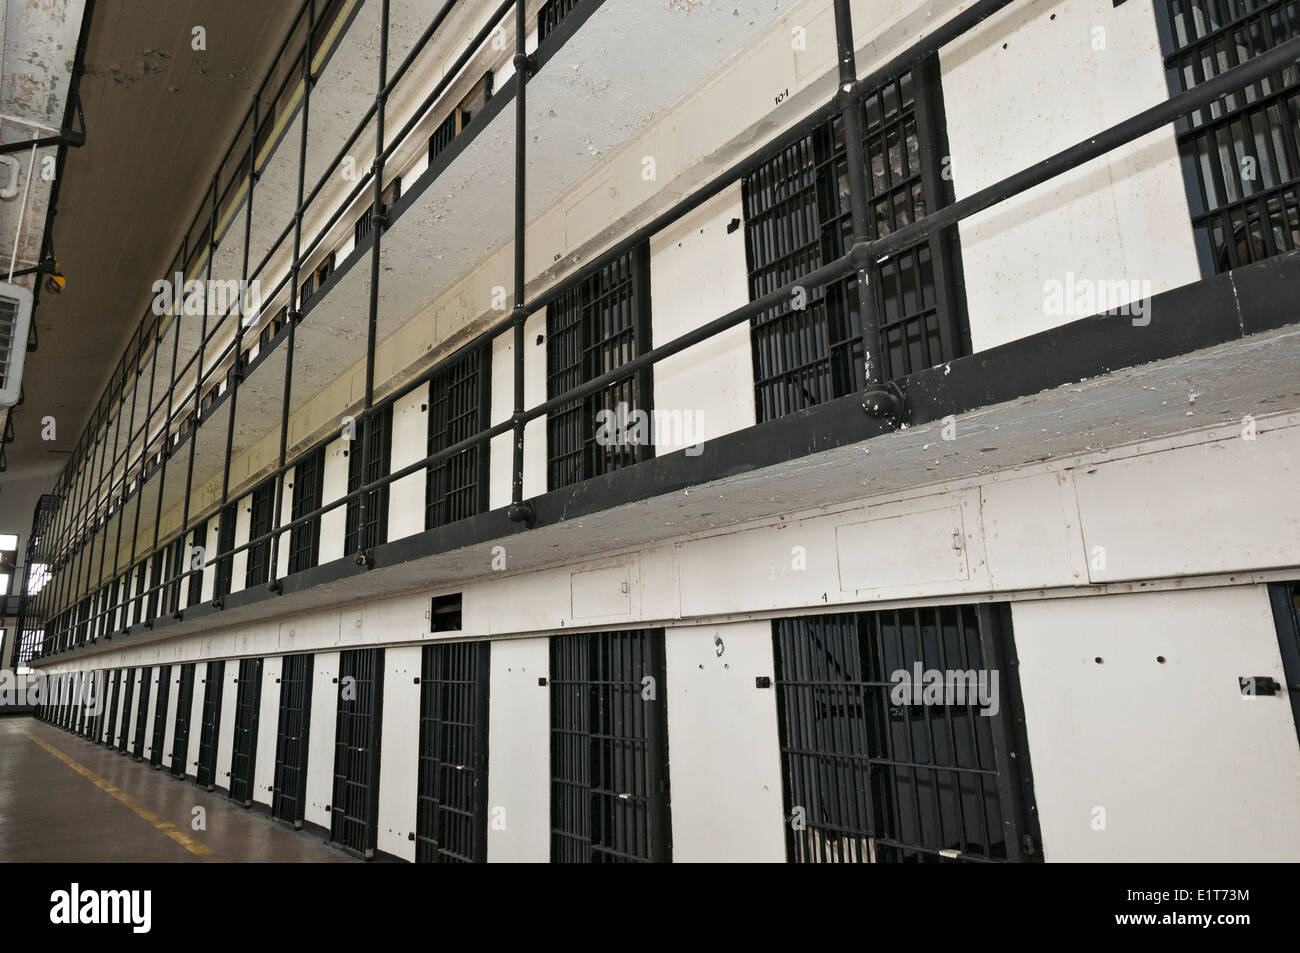 Montana, Deer Lodge, Old Montana Prison, operated 1871-1979, 1912 Cell House, interior cell blocks Stock Photo